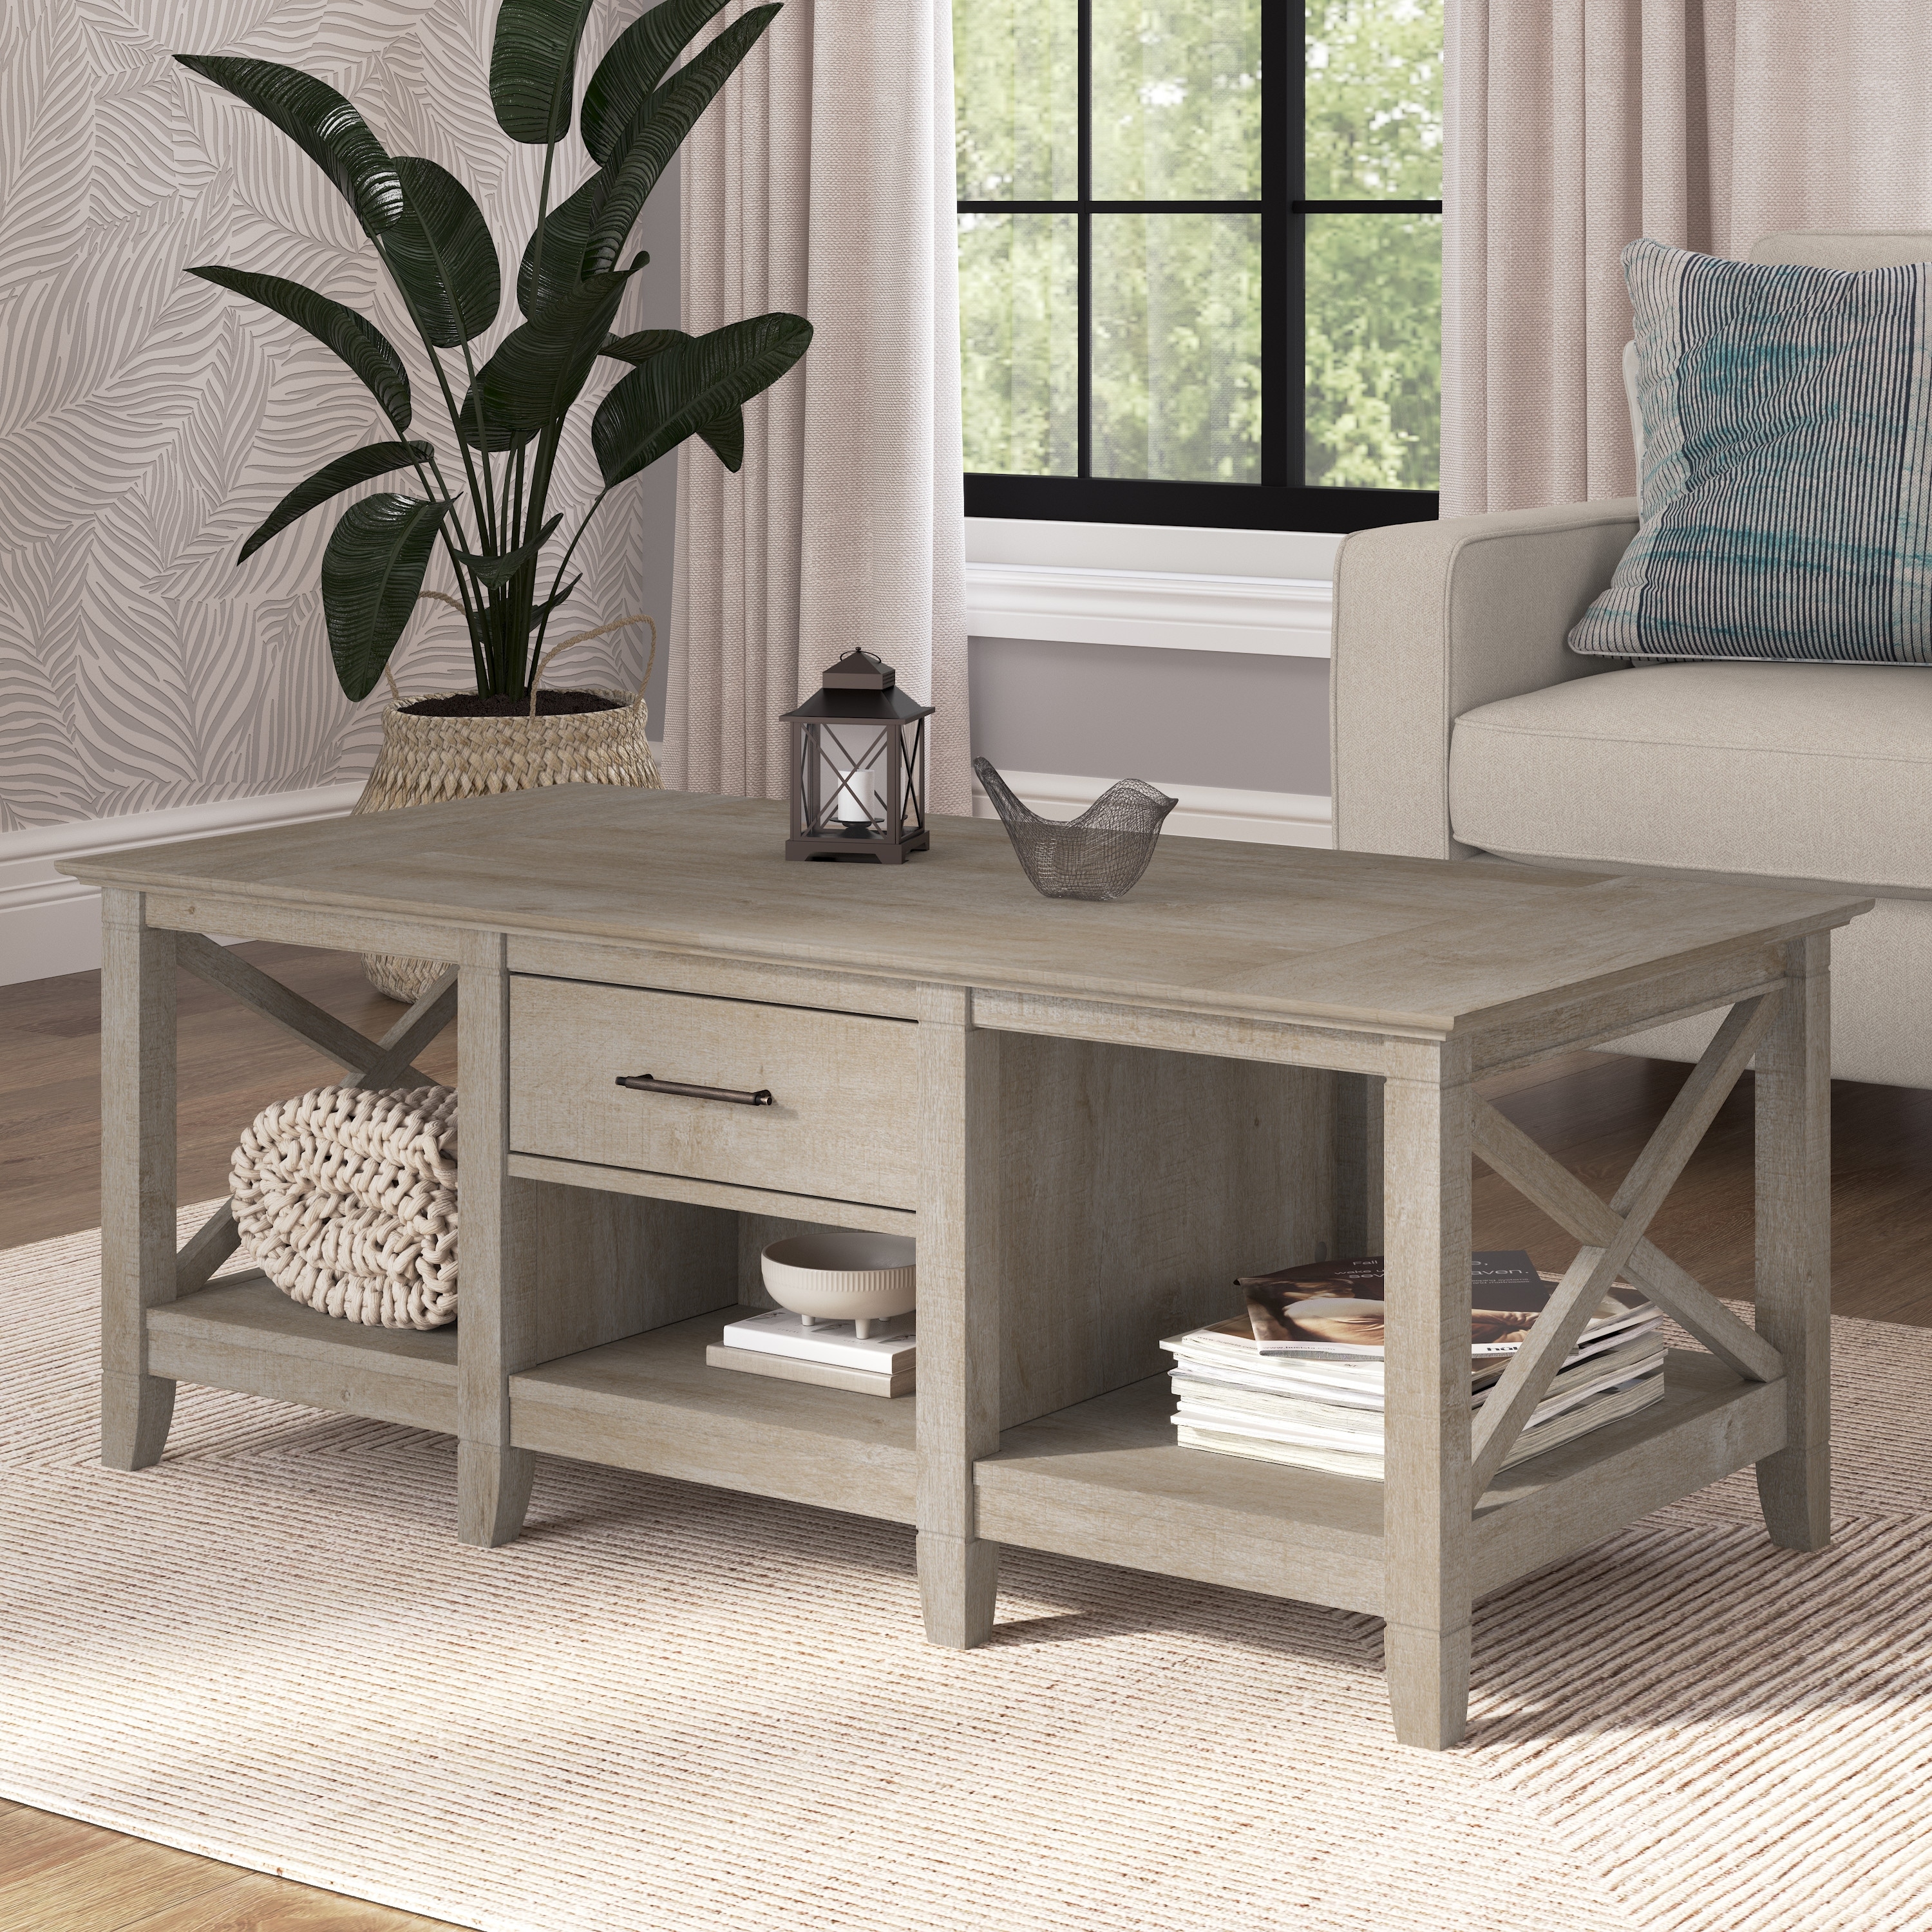 https://ak1.ostkcdn.com/images/products/is/images/direct/7946be44a8fa943aed9a6cc63343cca6138e2b94/Key-West-Coffee-Table-with-Storage-by-Bush-Furniture.jpg